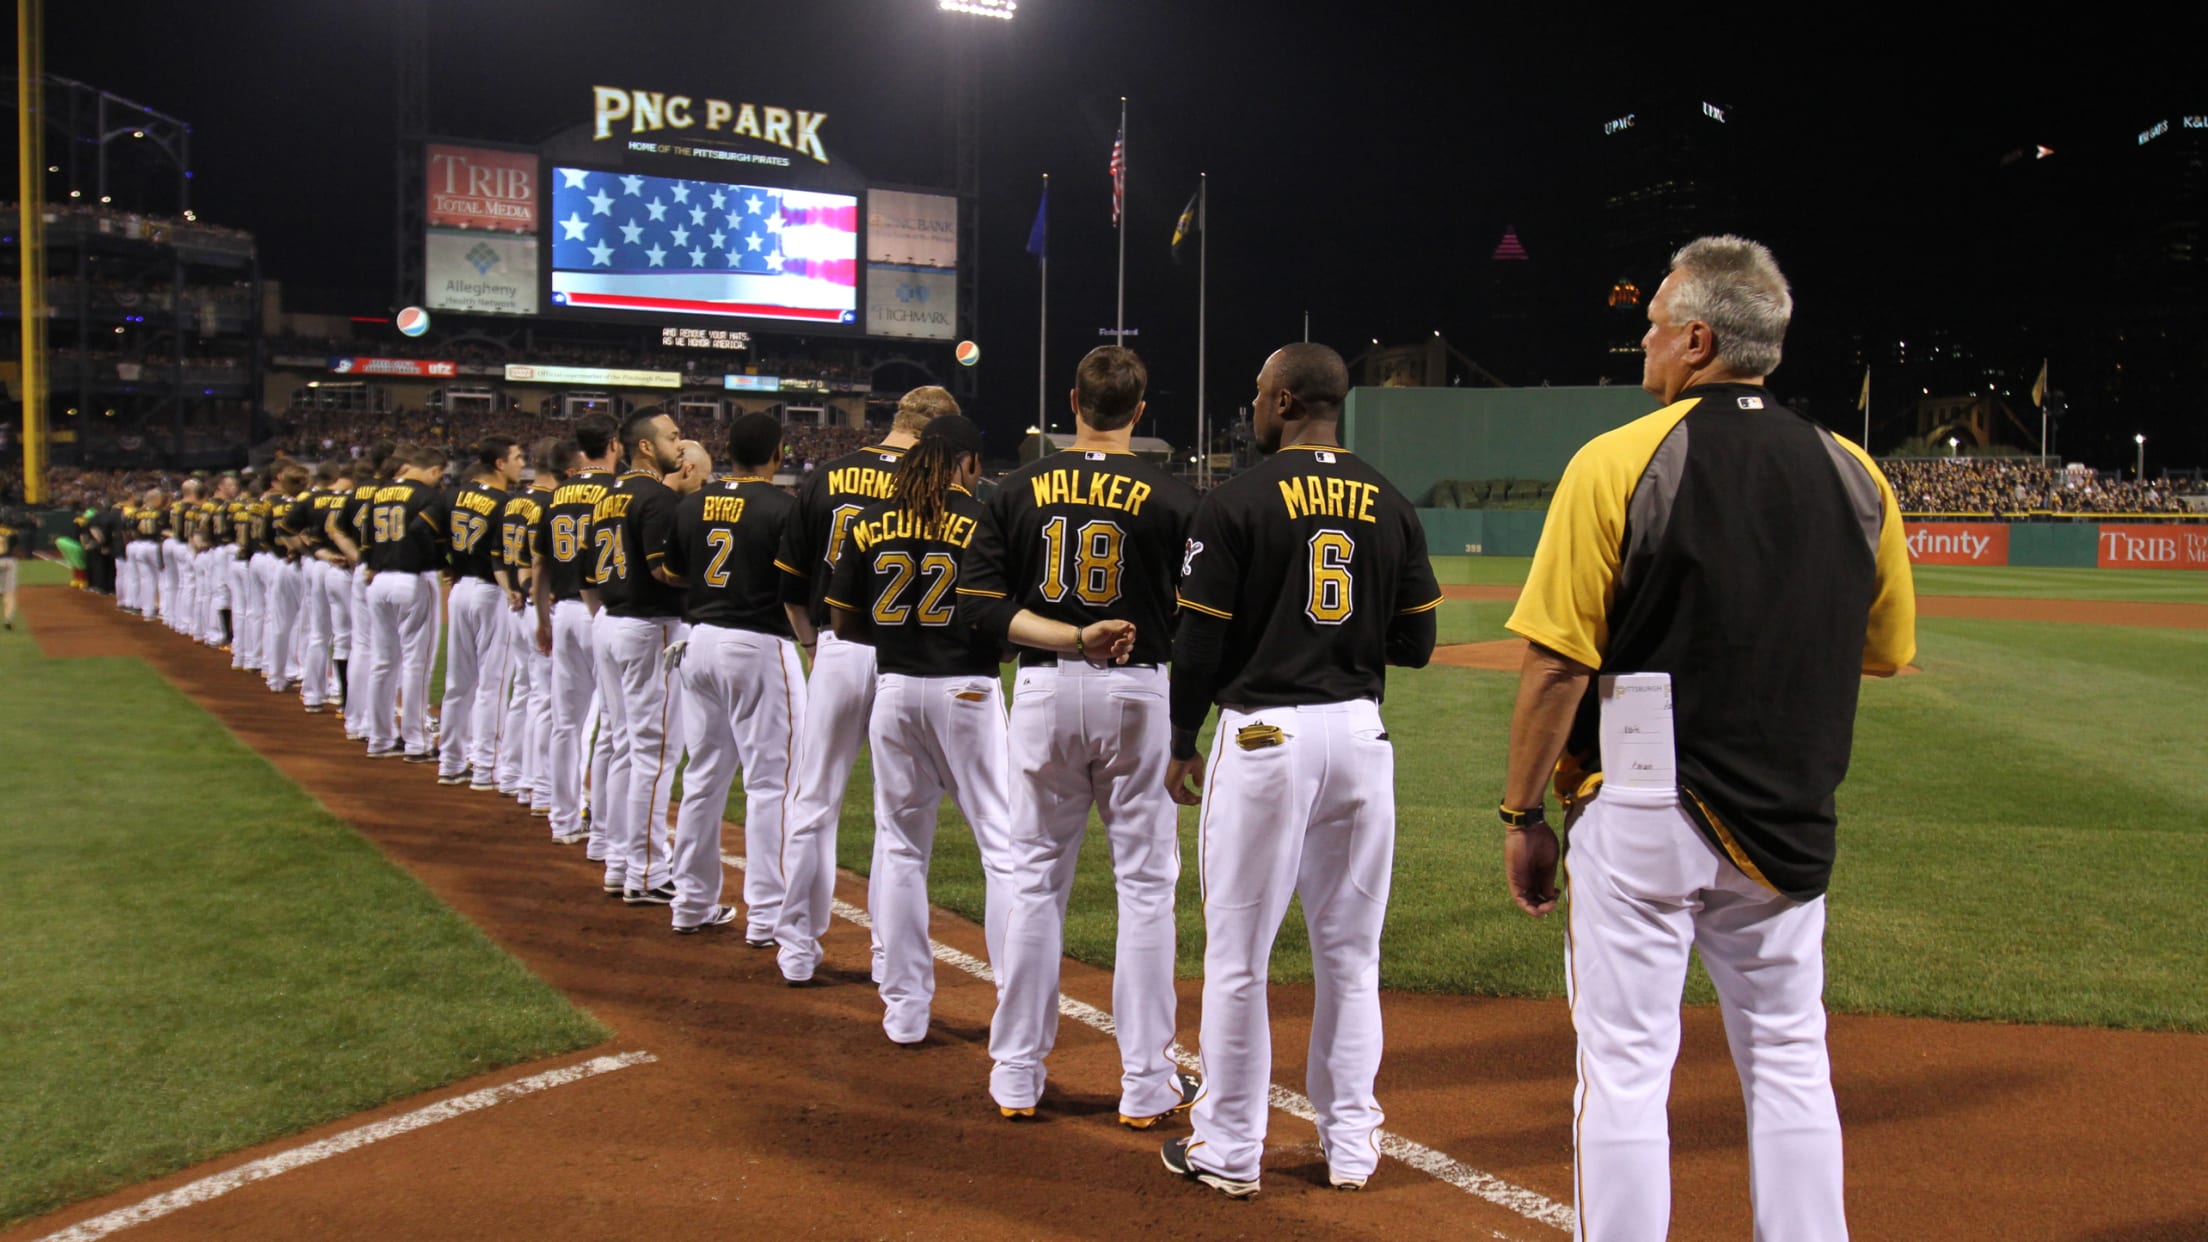 In the PNC Park era, what players do you think looked best in each